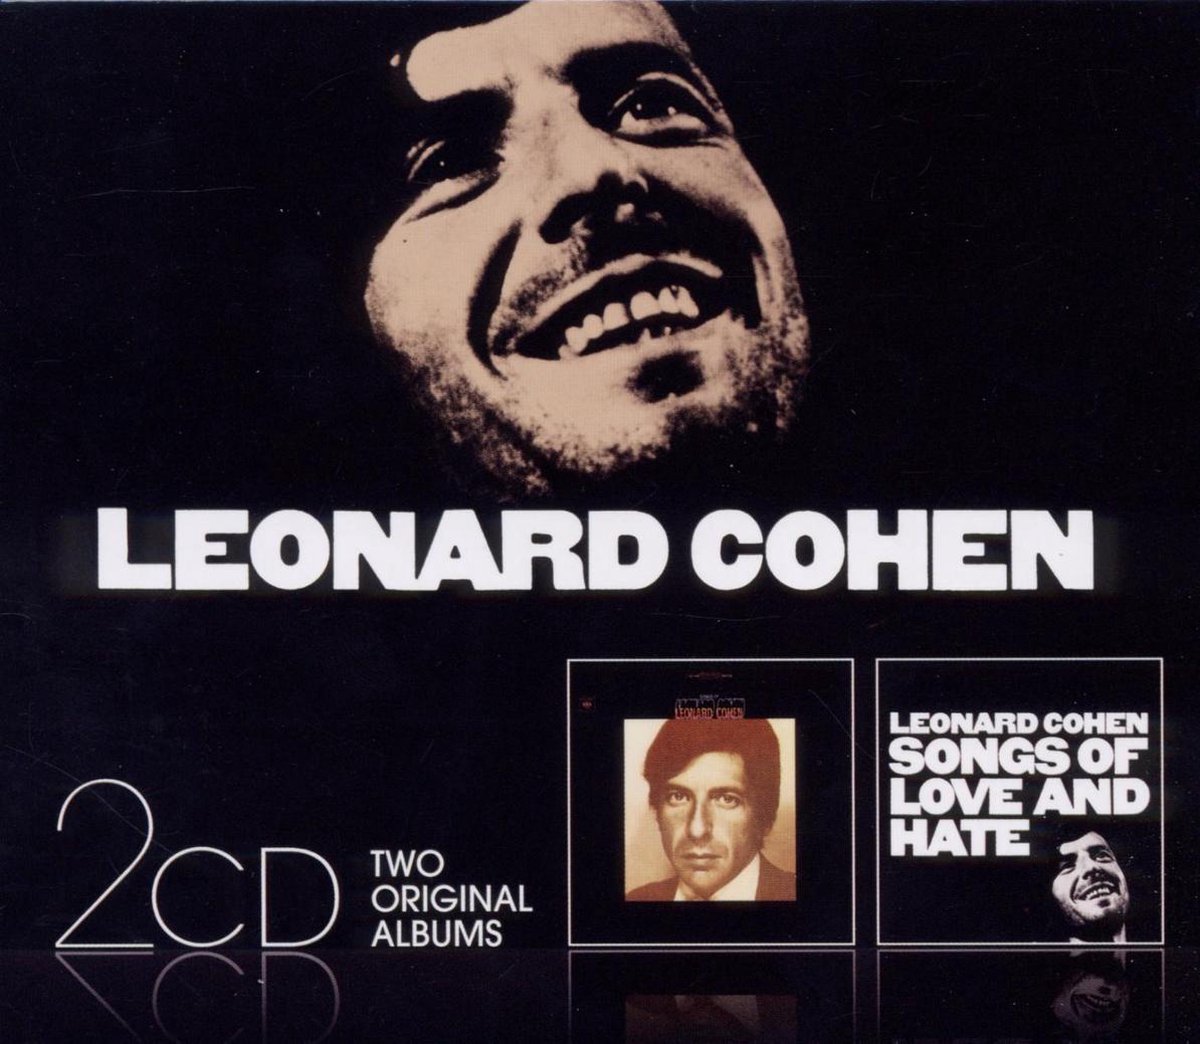 Songs of Leonard Cohen. Songs of Love and Hate | Leonard Cohen image5